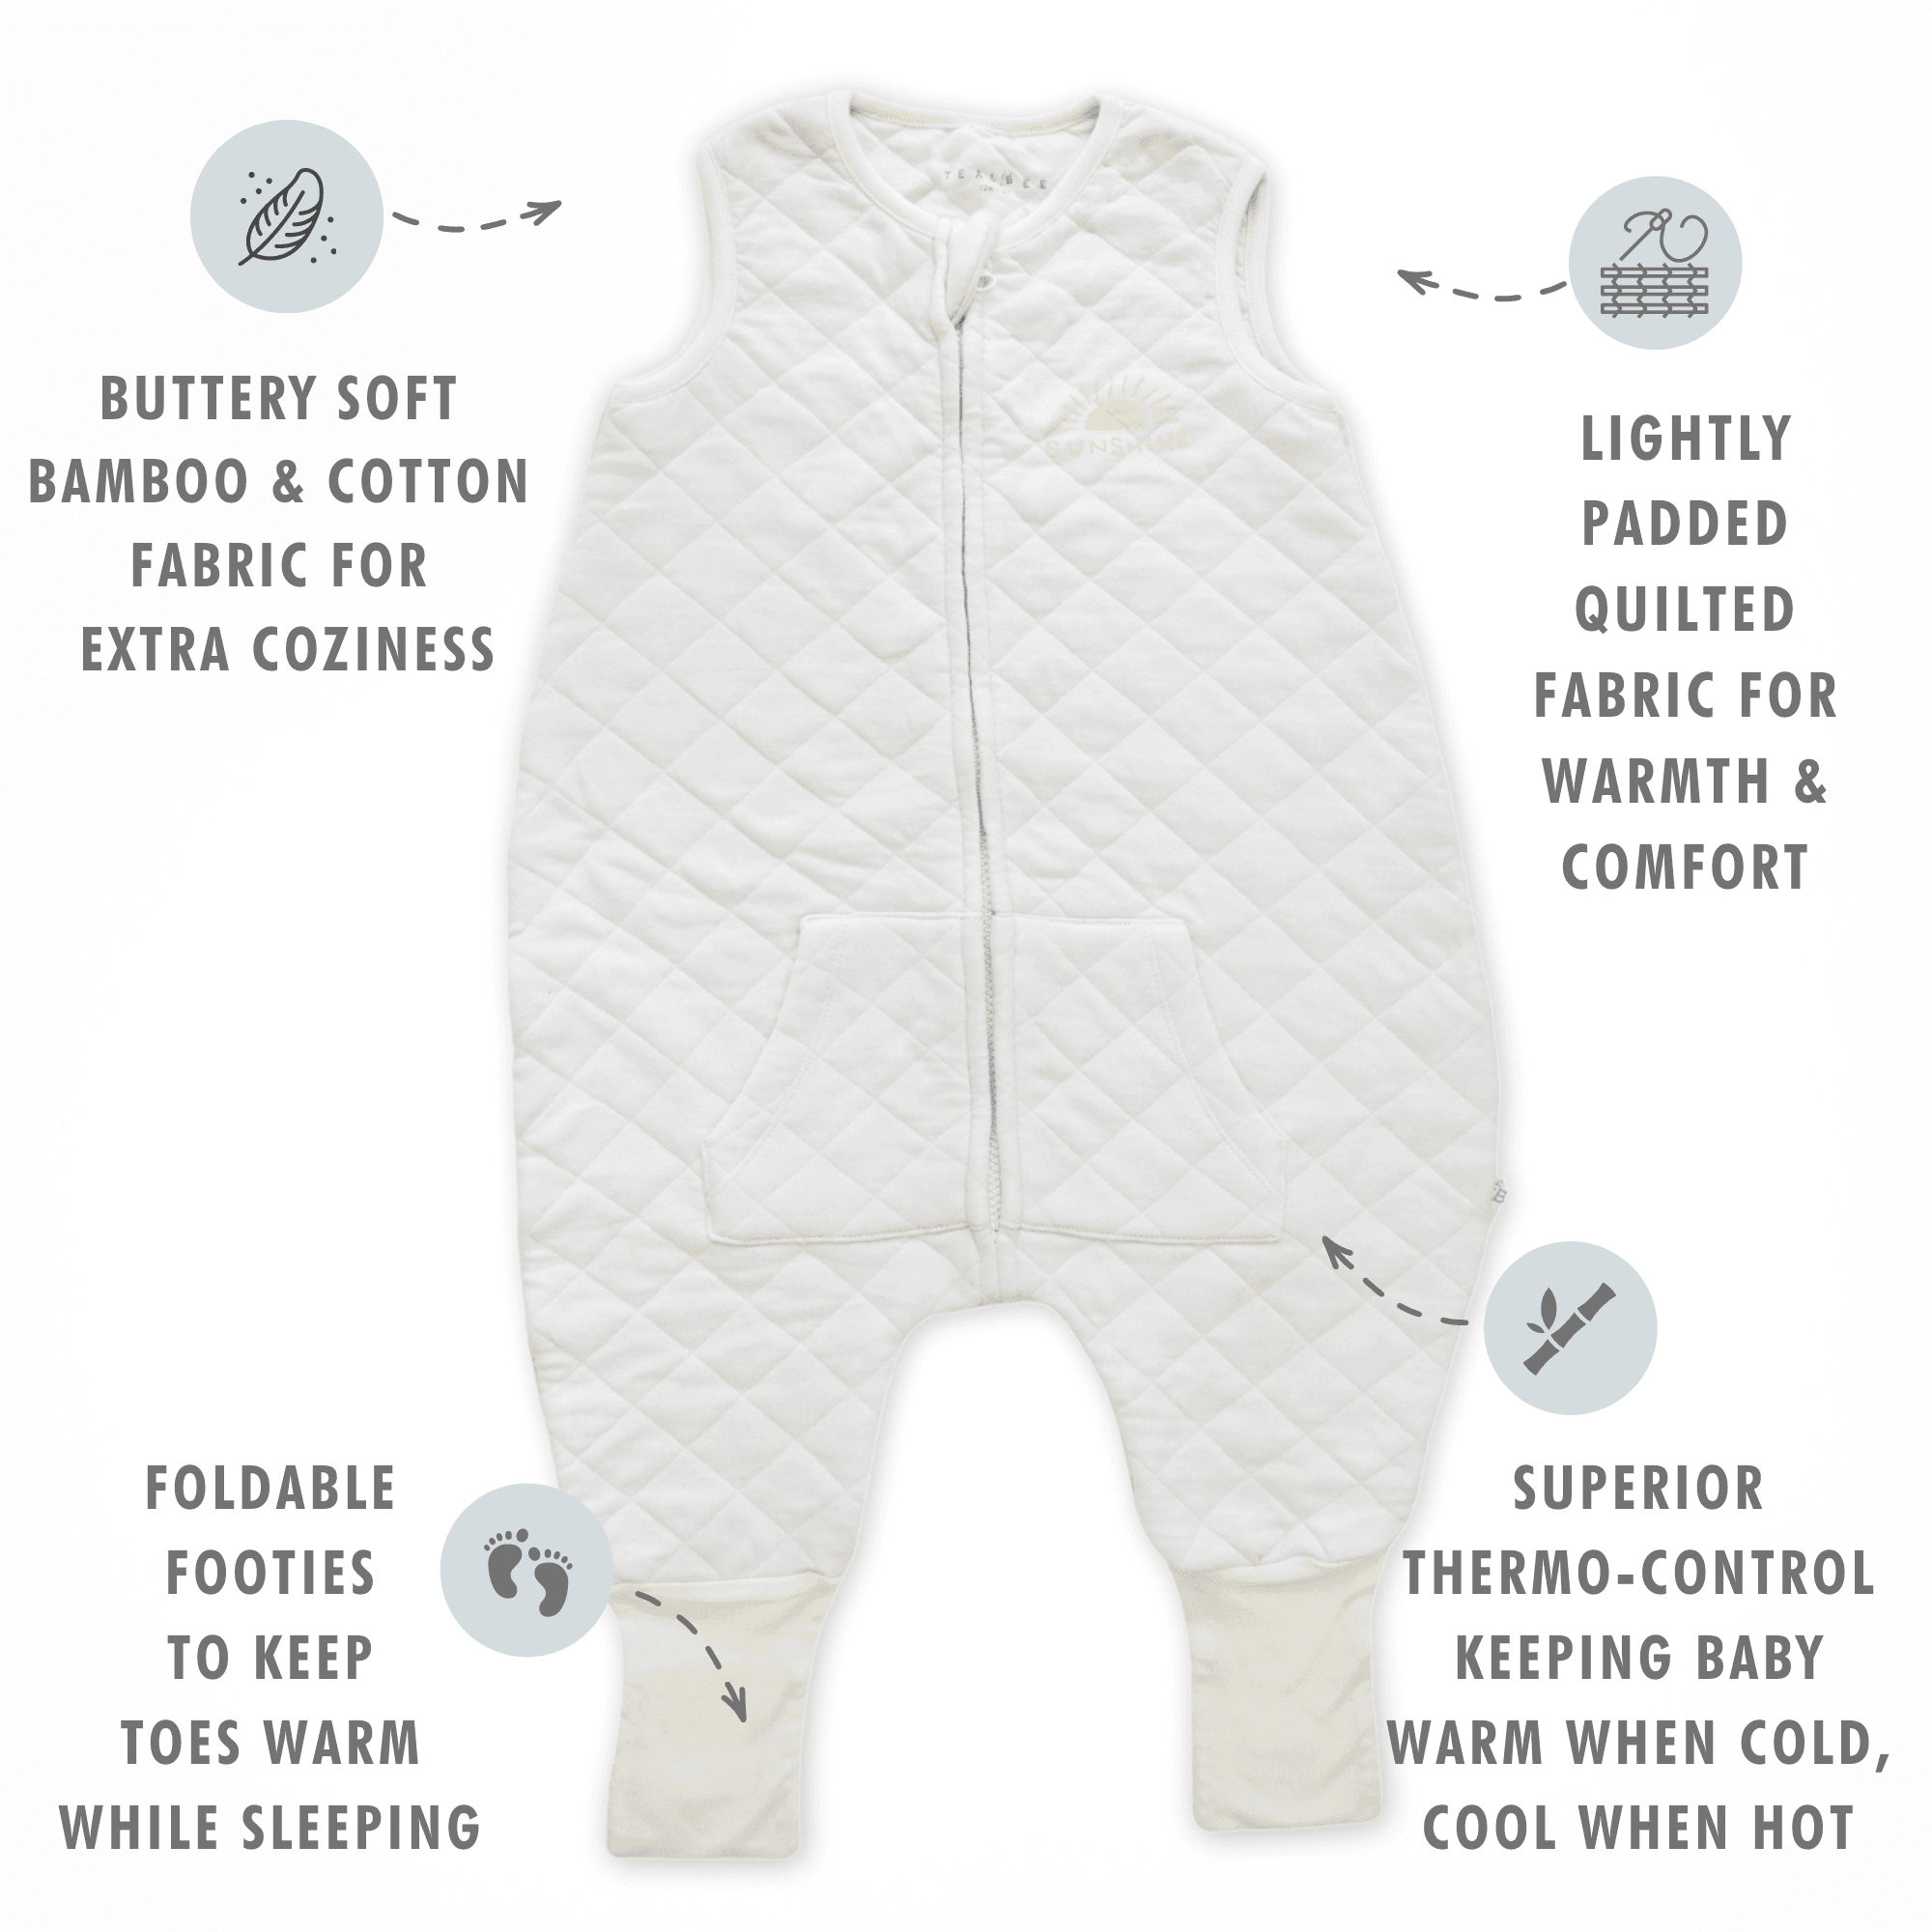 SUNSHINE DREAMSUITS SLEEP SACK FOR TODDLERS